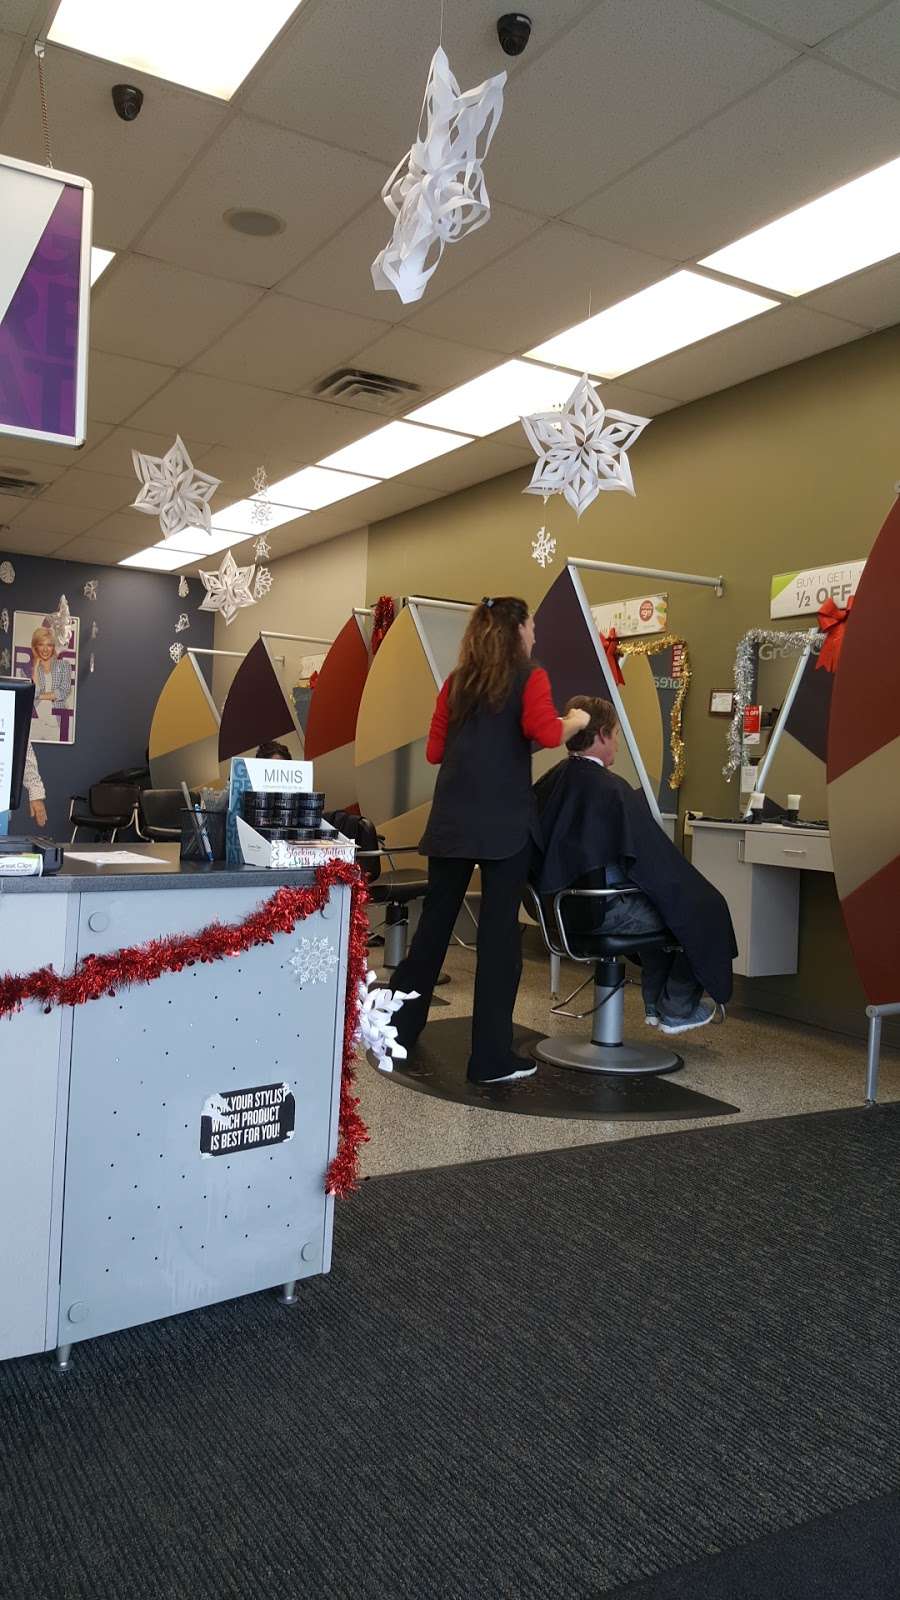 Great Clips | 8411 Windfall Ln, Camby, IN 46113 | Phone: (317) 821-1821